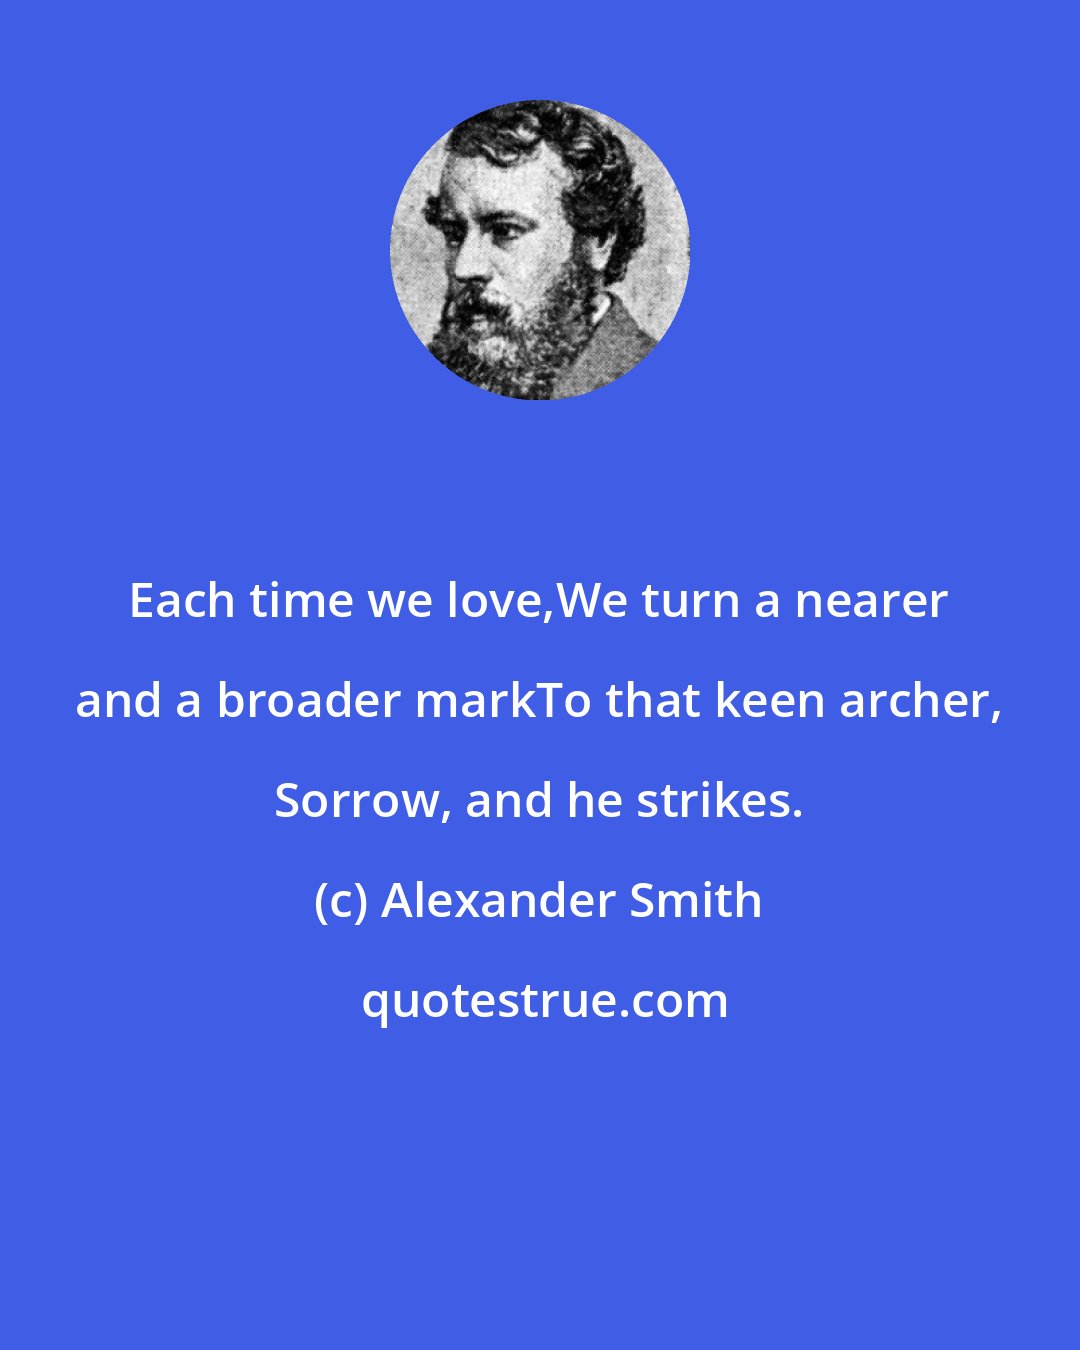 Alexander Smith: Each time we love,We turn a nearer and a broader markTo that keen archer, Sorrow, and he strikes.